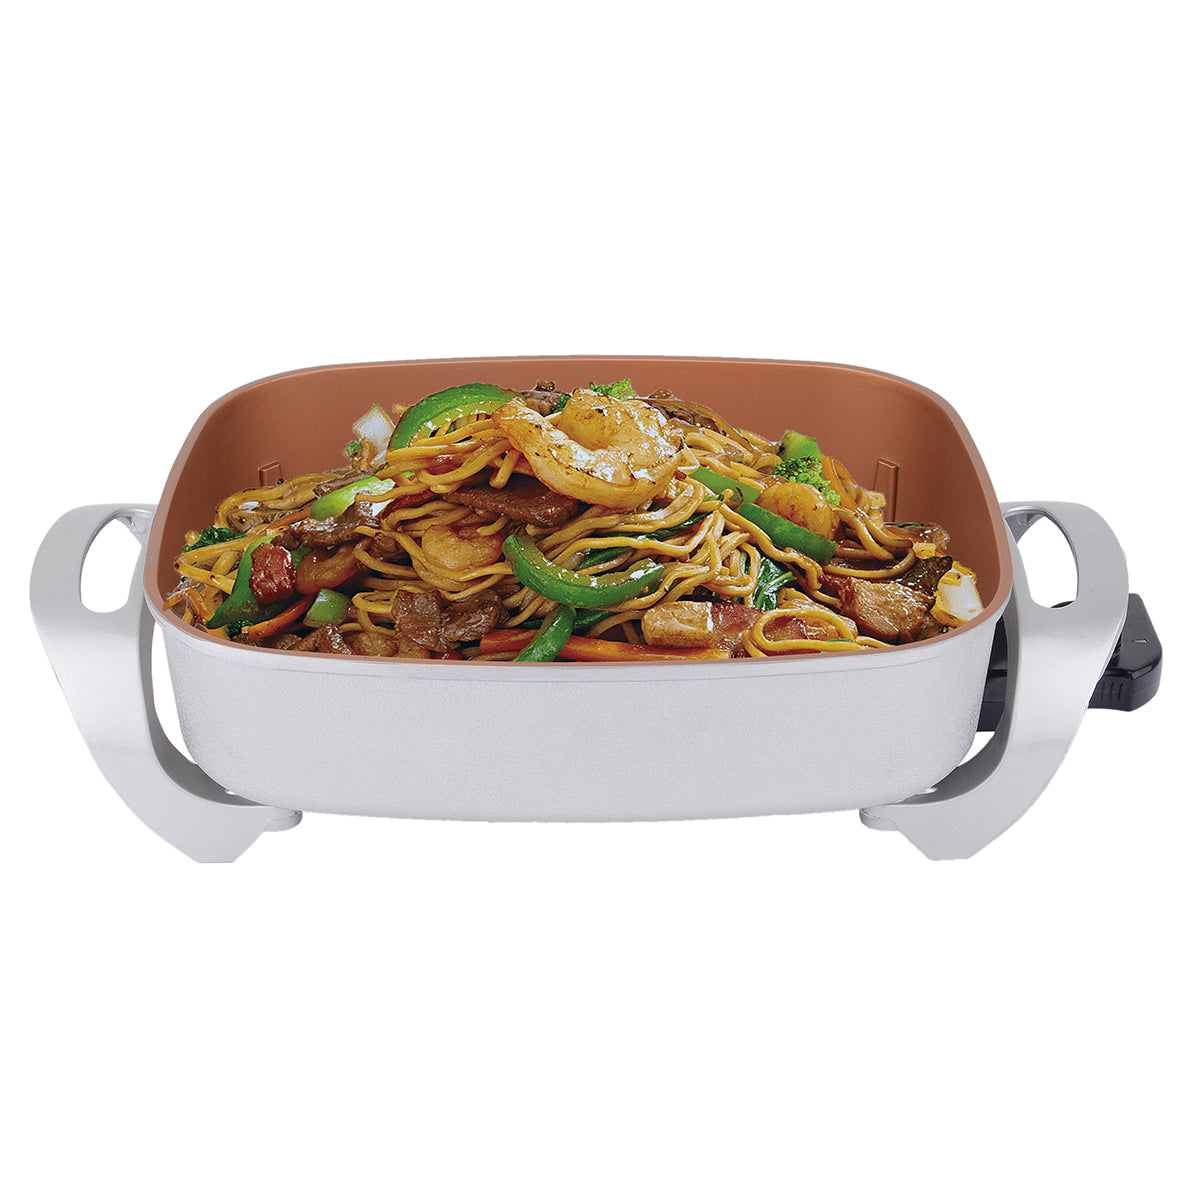 White Copper Electric Fry Pan with freshly made stir fry noodles inside.